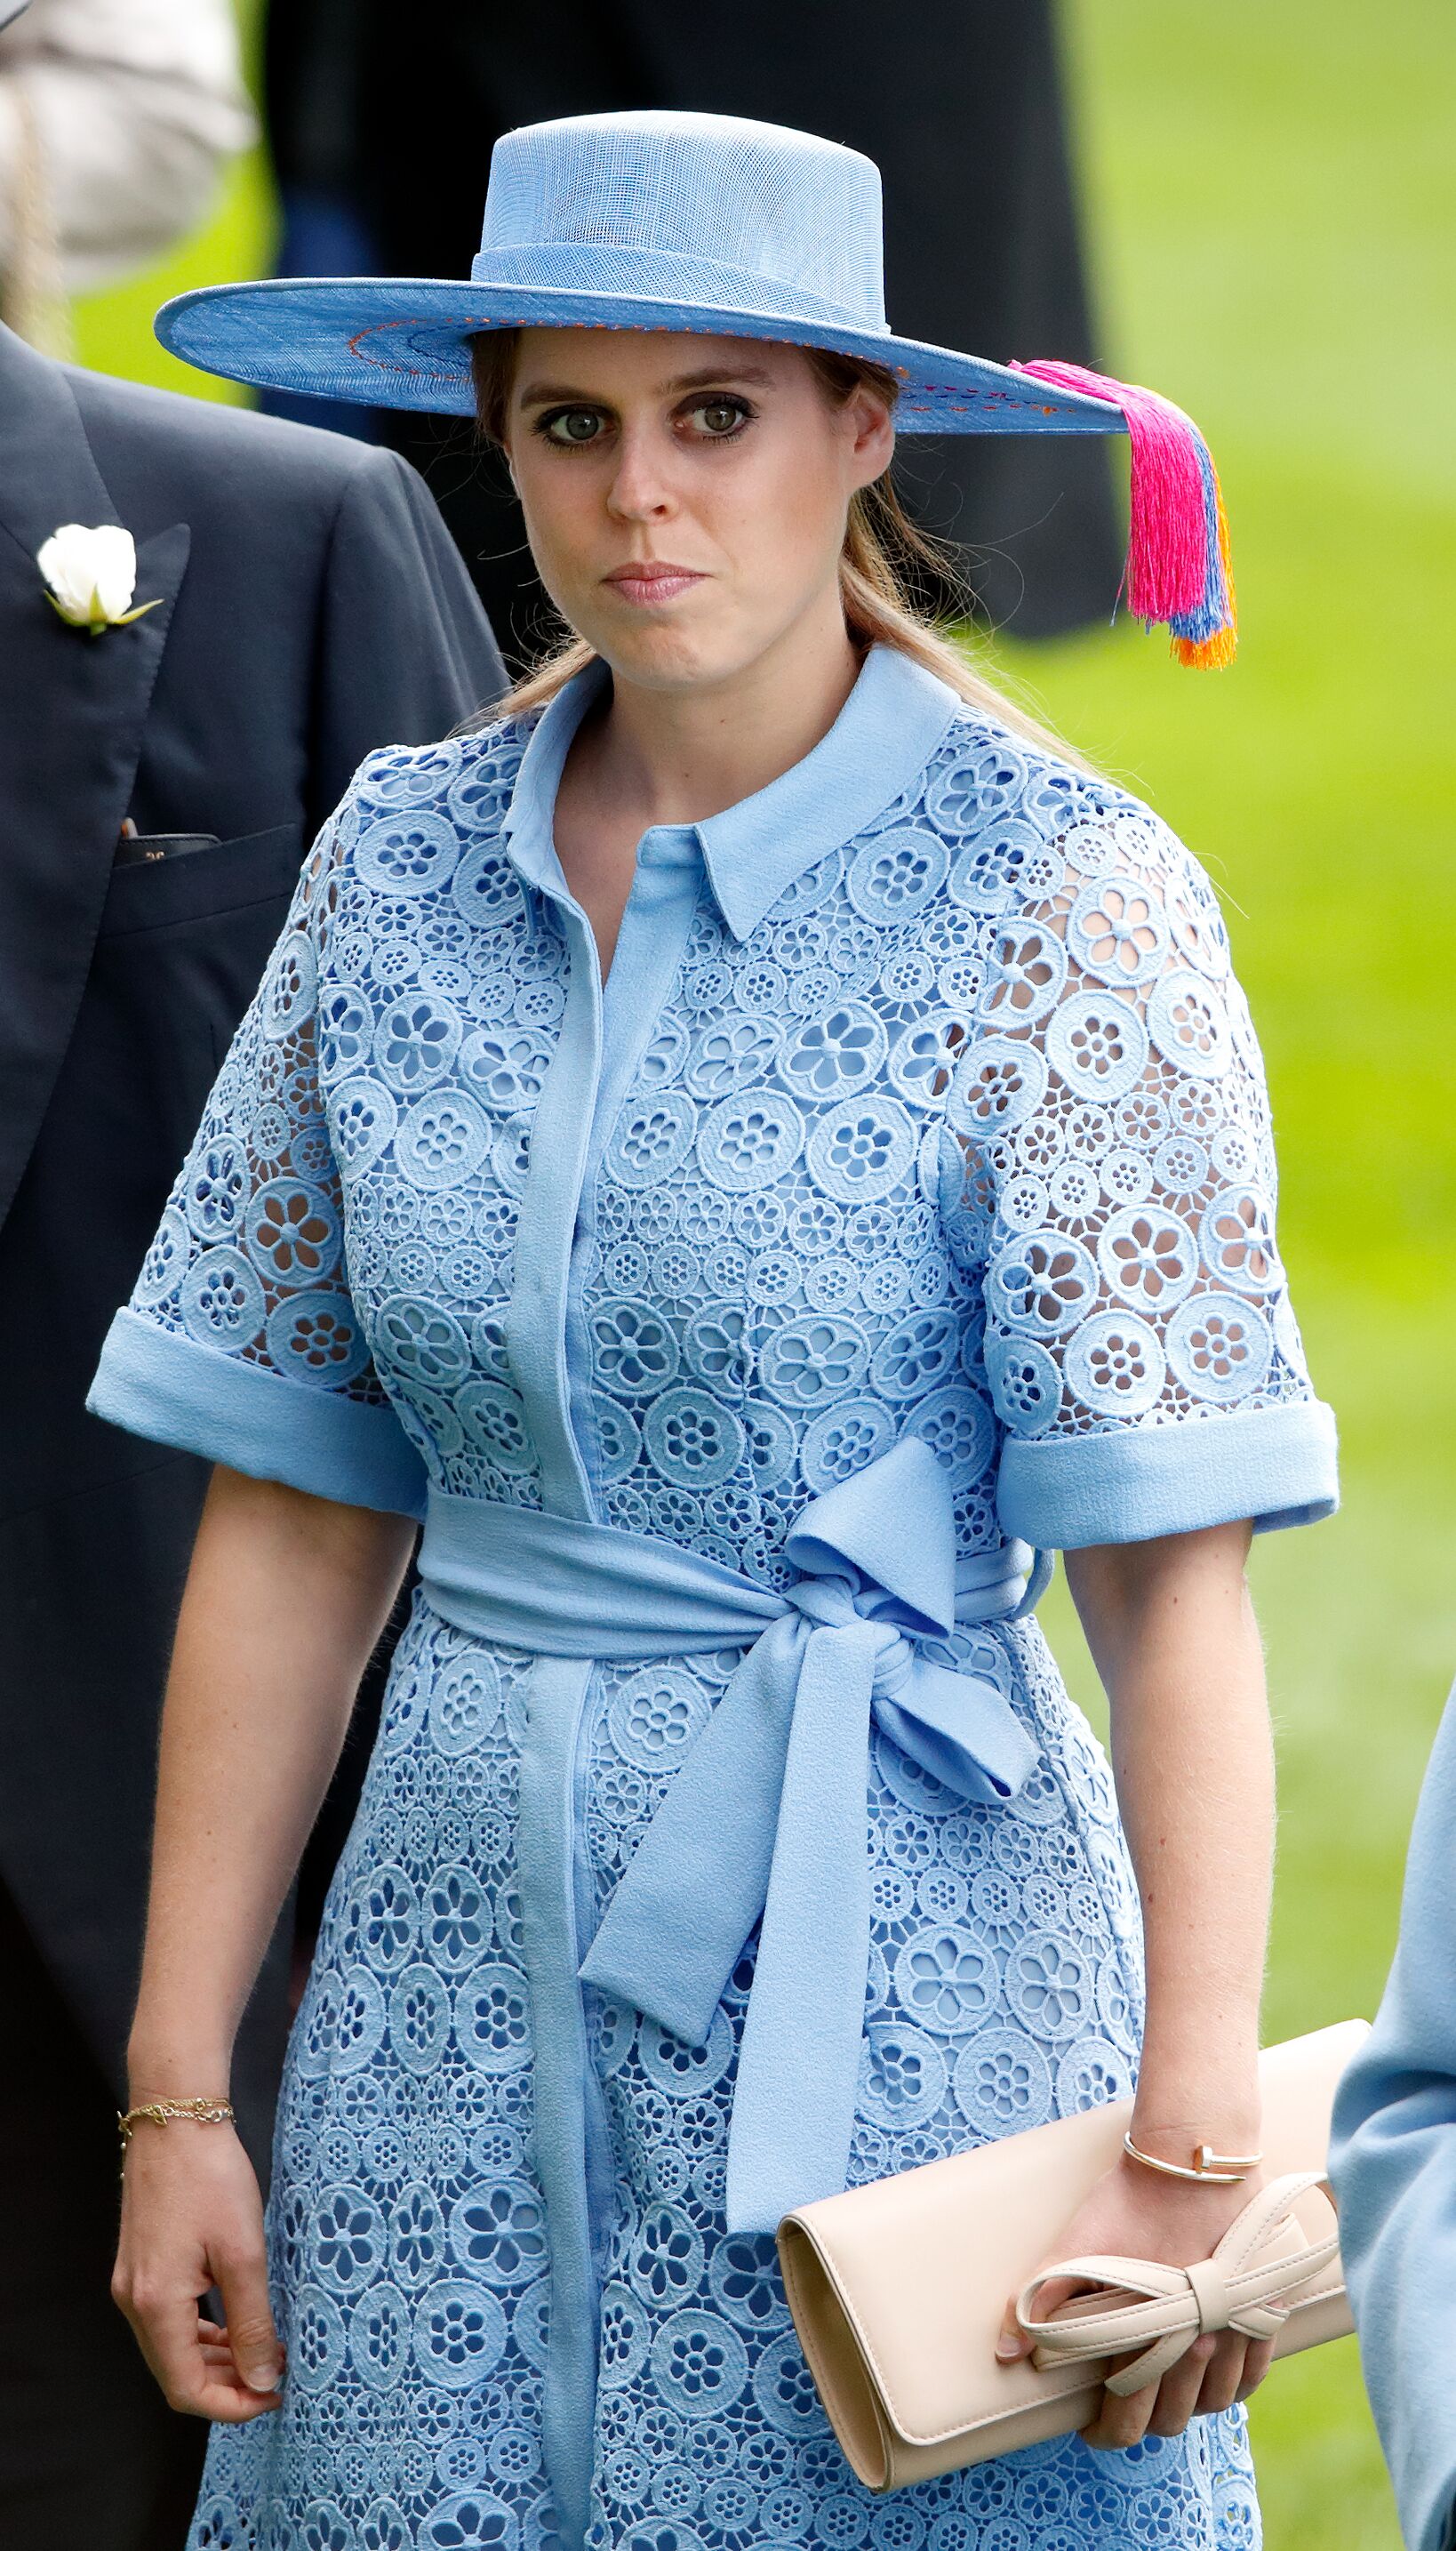 Princess Beatrice at Royal Ascot on June 18, 2019 in Ascot, England. | Source: Getty Images